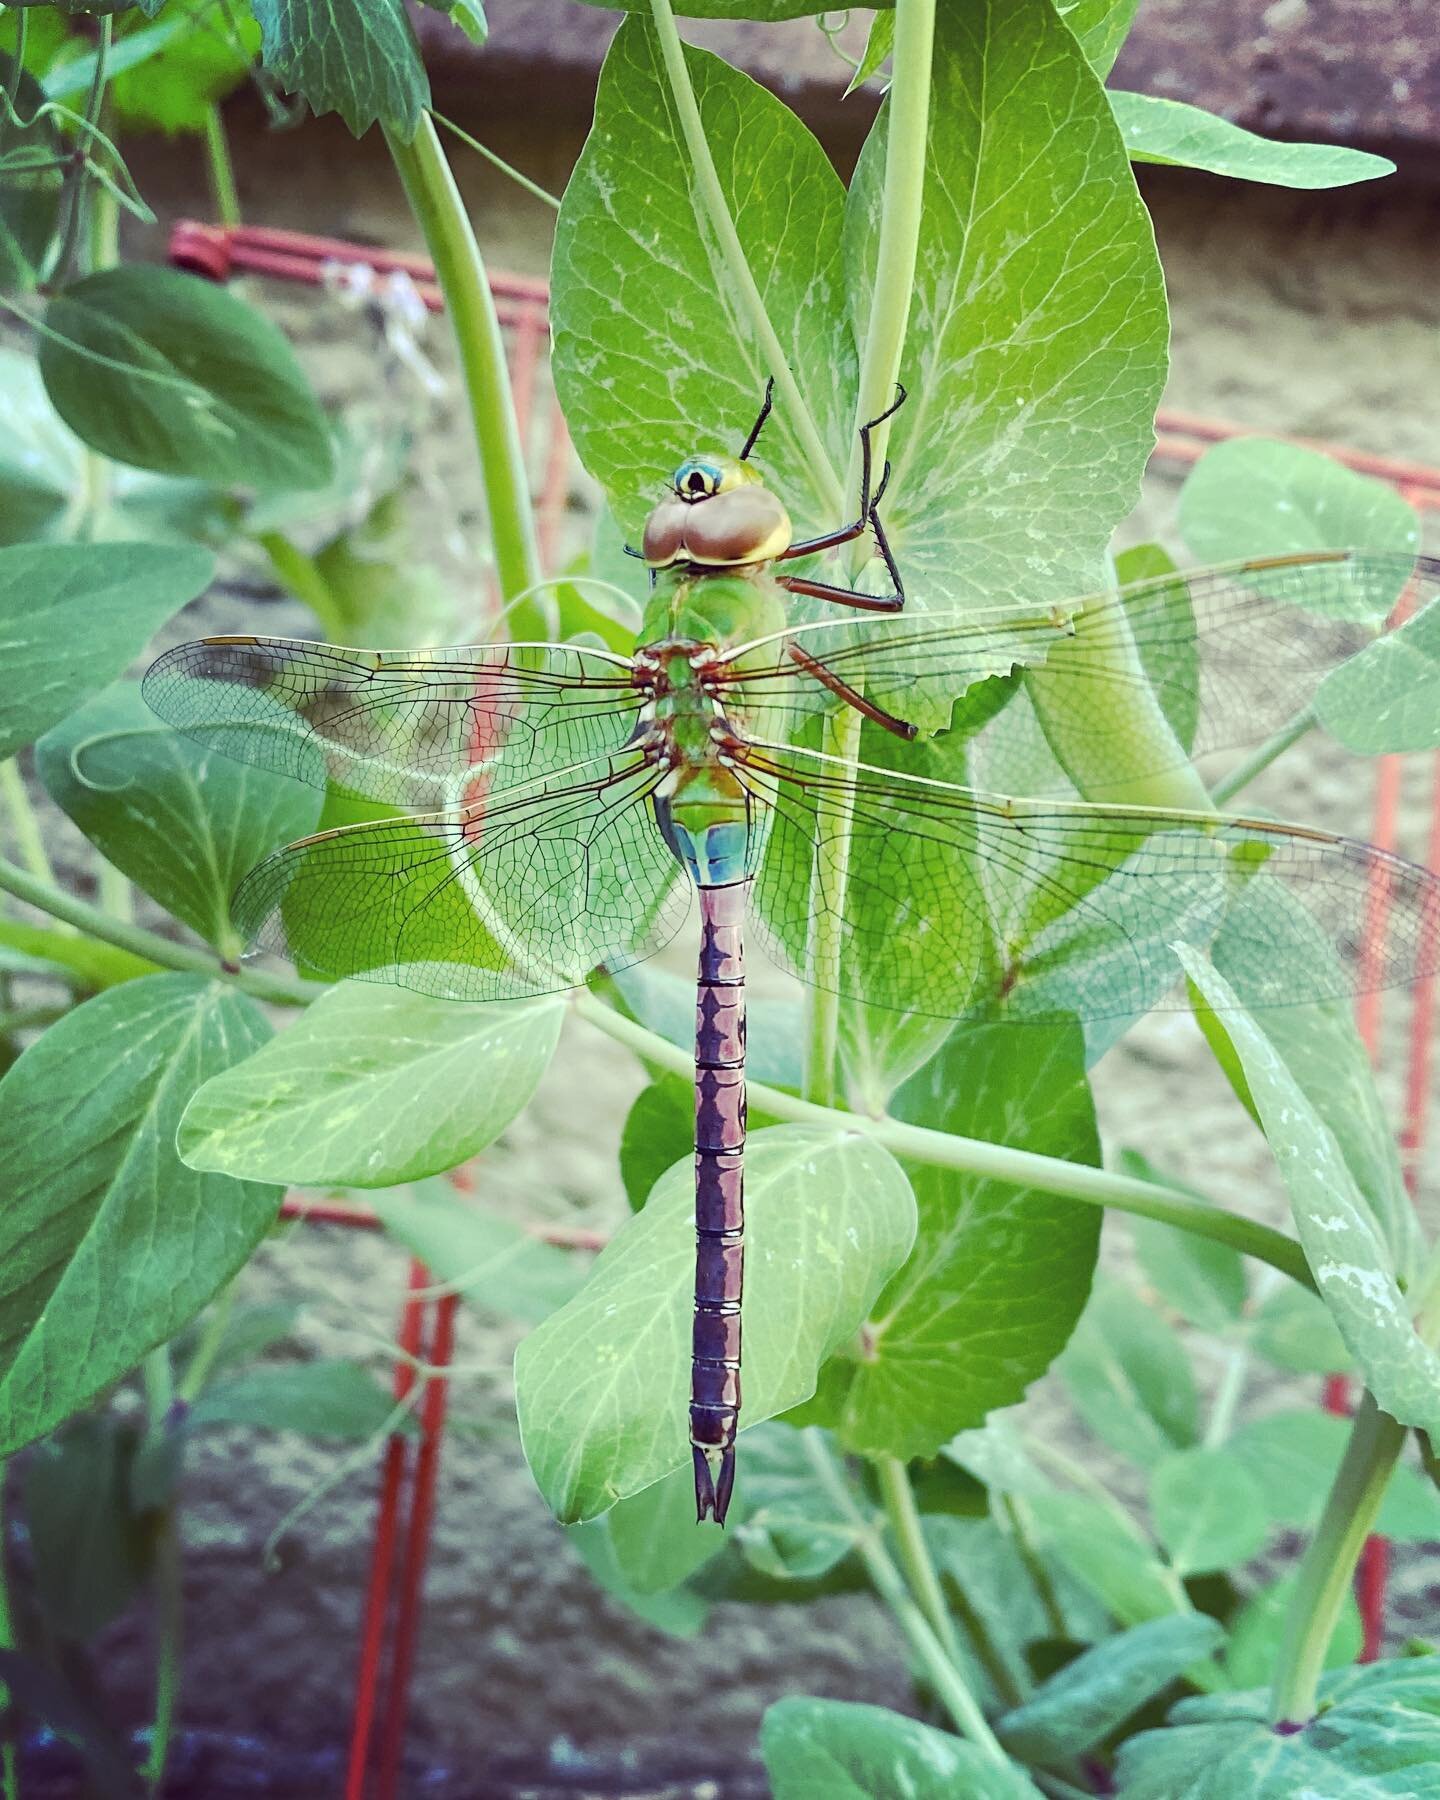 My spirit insect visited my garden today. I feel so much more connected to this universe after visiting with this beautiful creature. How are you feeling today? 

#dragonfly #spiritanimal #gardenmagic #nashville #urbangarden #beauty